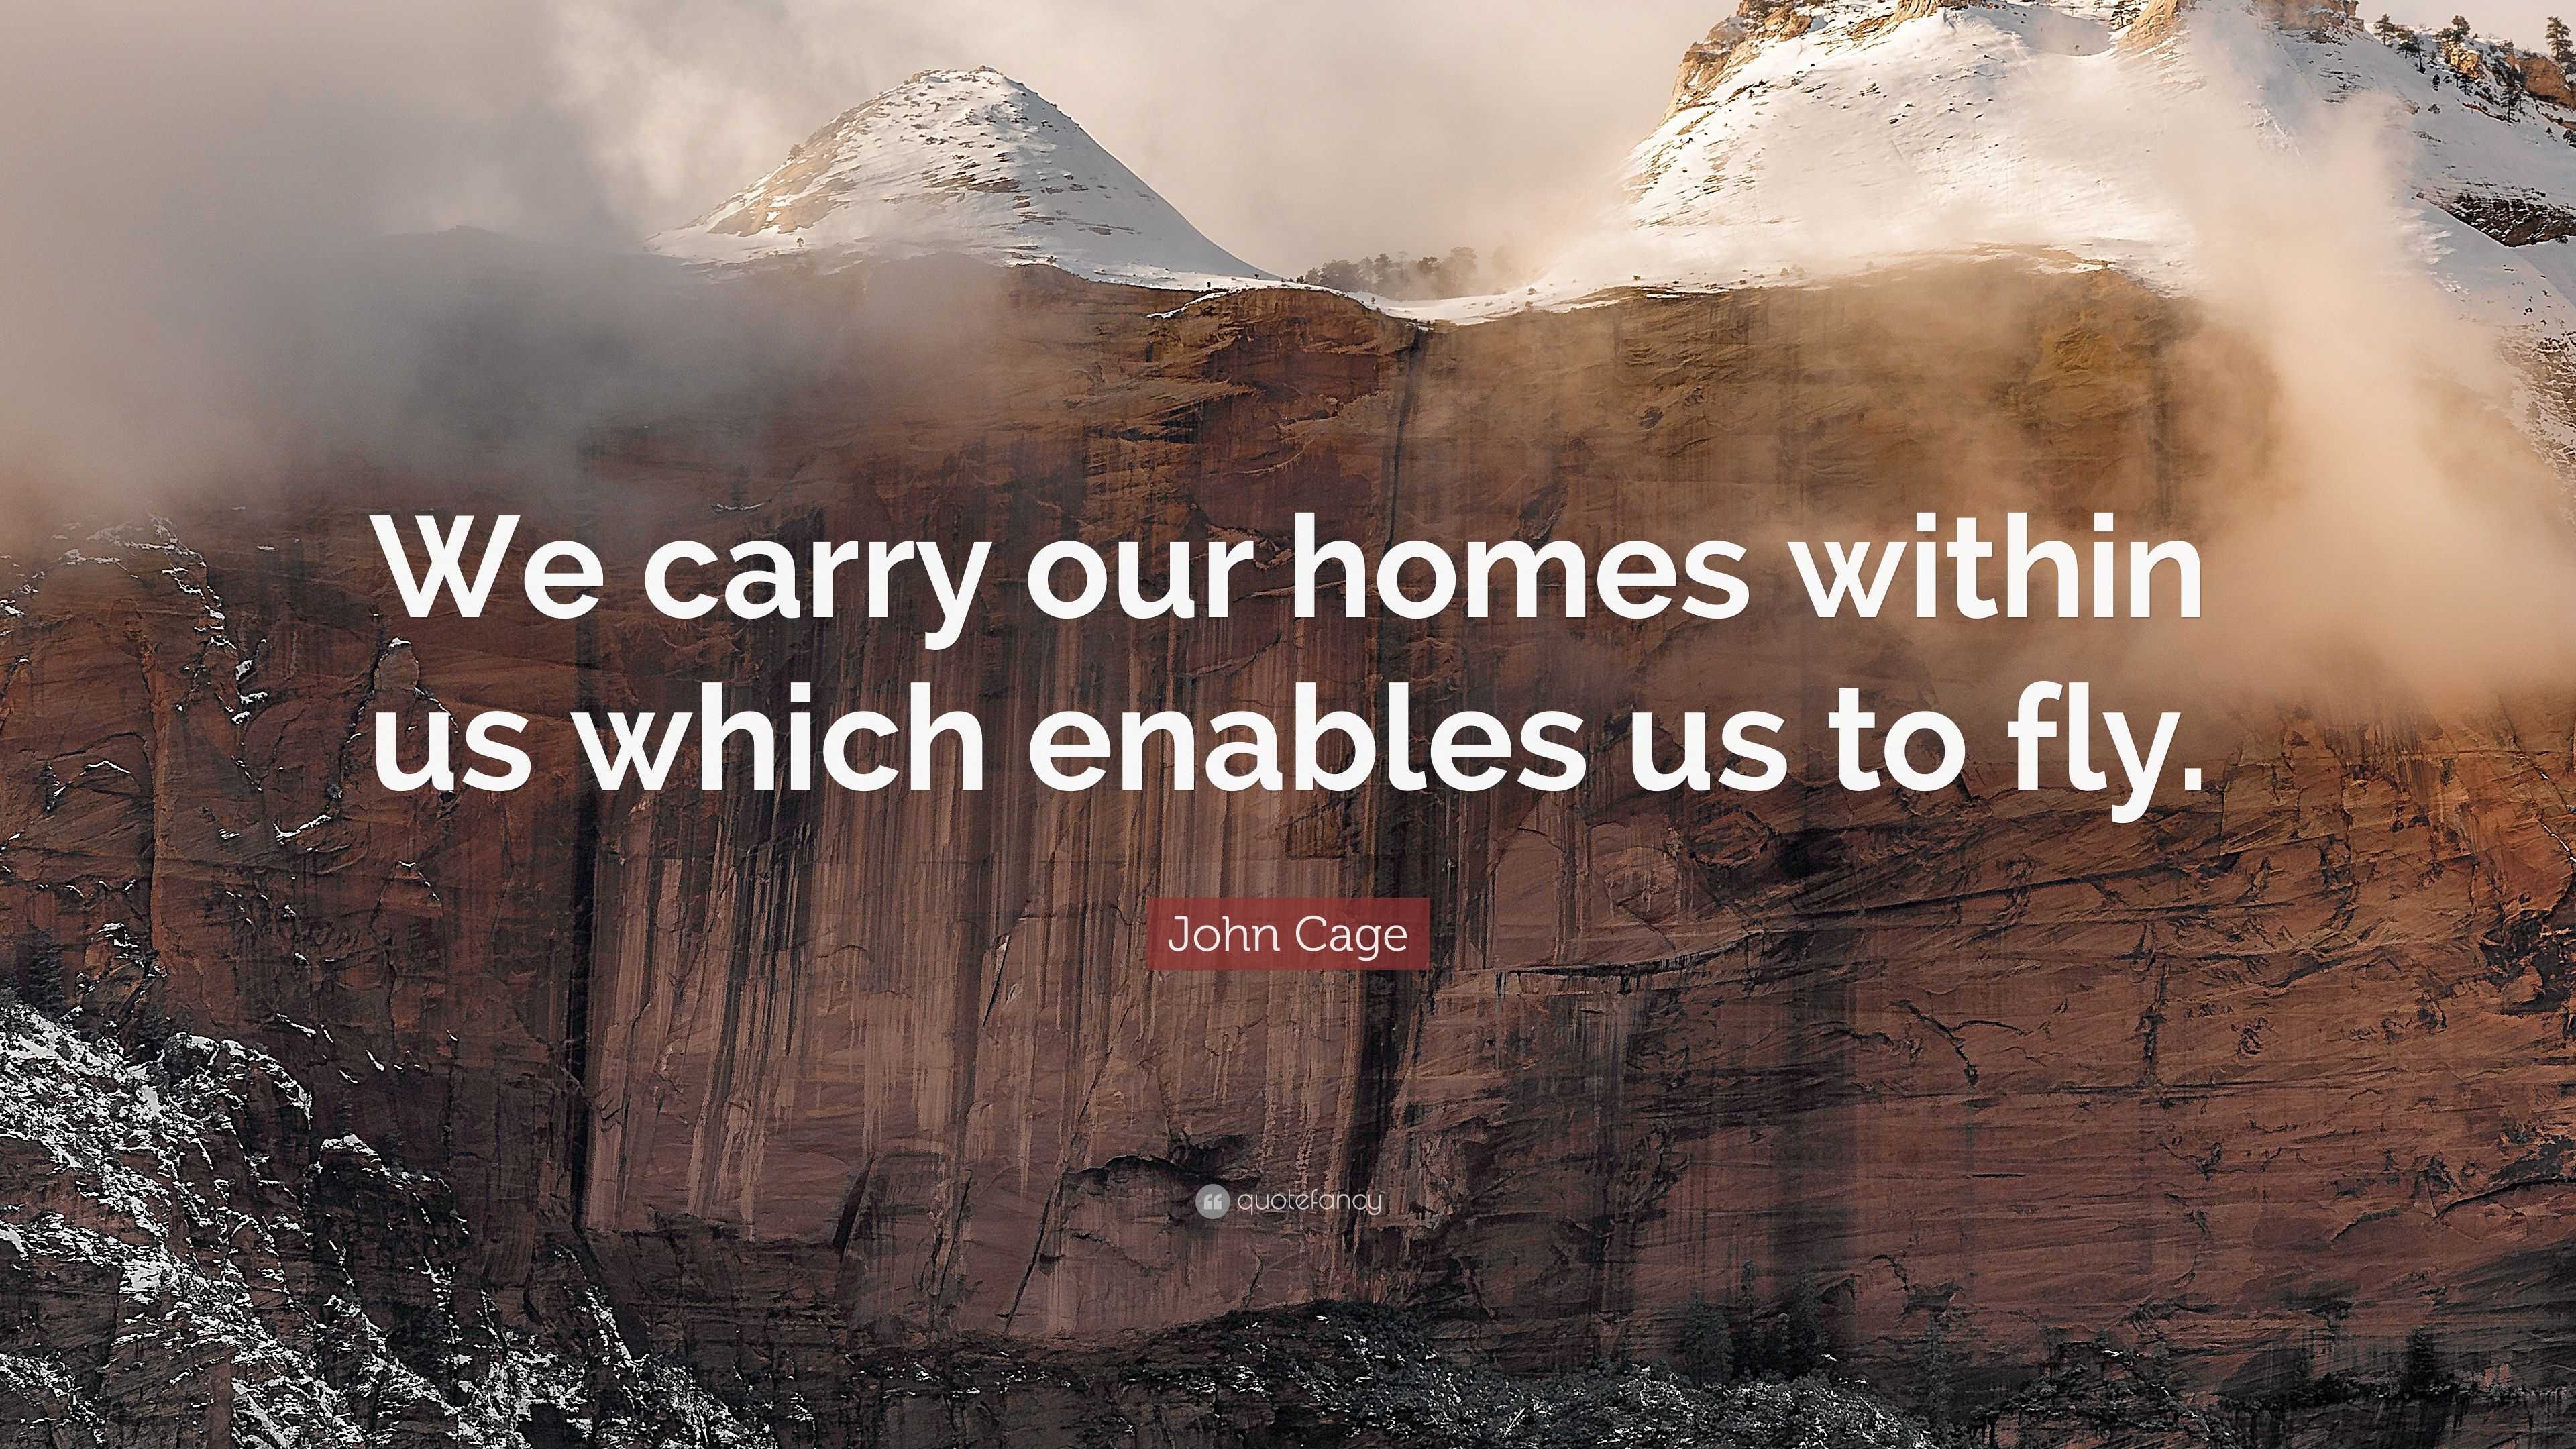 John Cage Quote: “We carry our homes within us which enables us to fly.”
